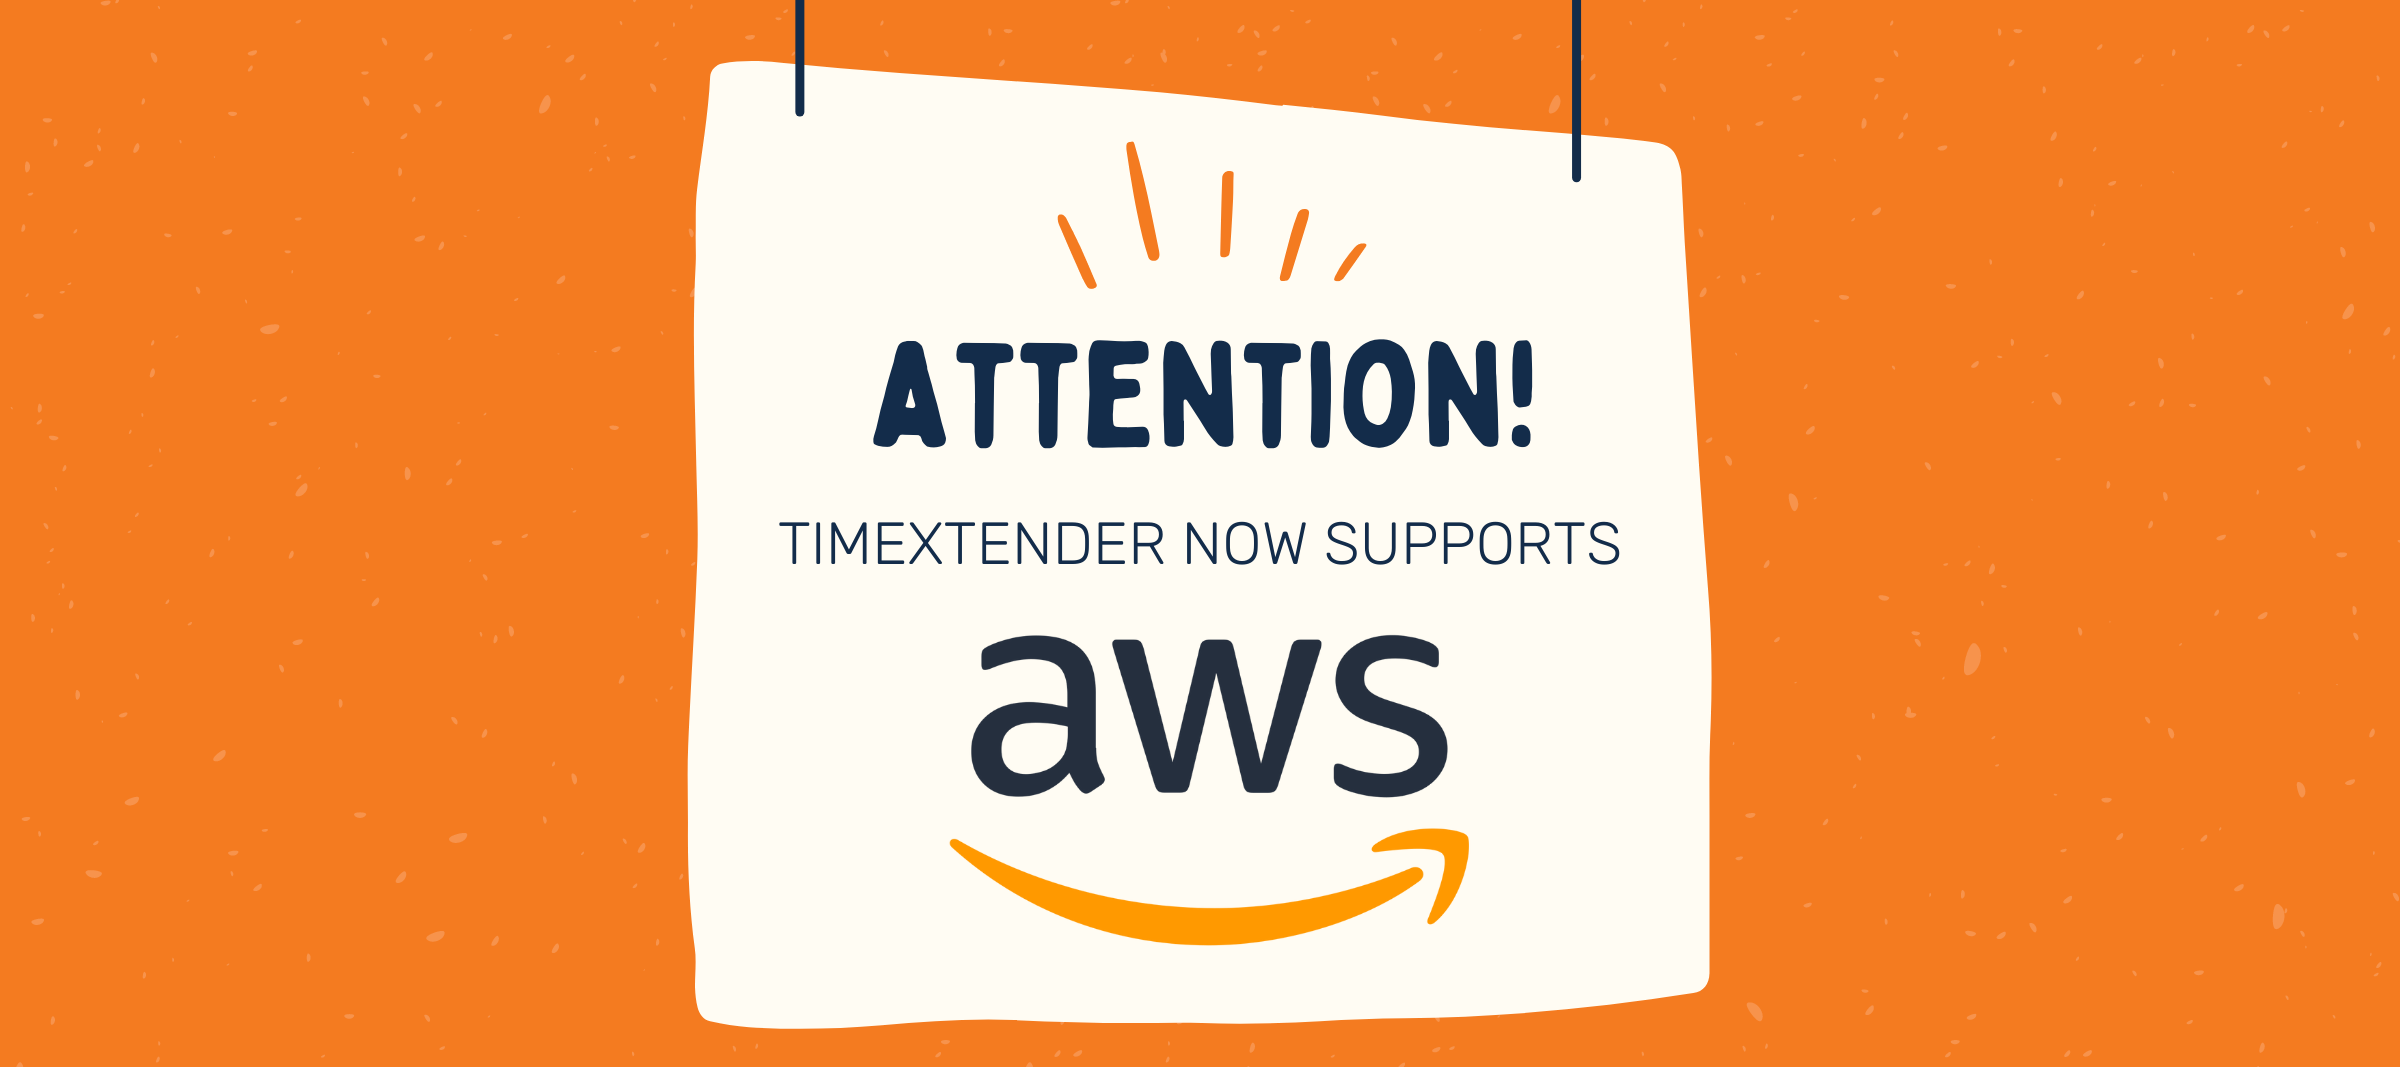 TimeXtender now supports full end-to-end deployment on AWS